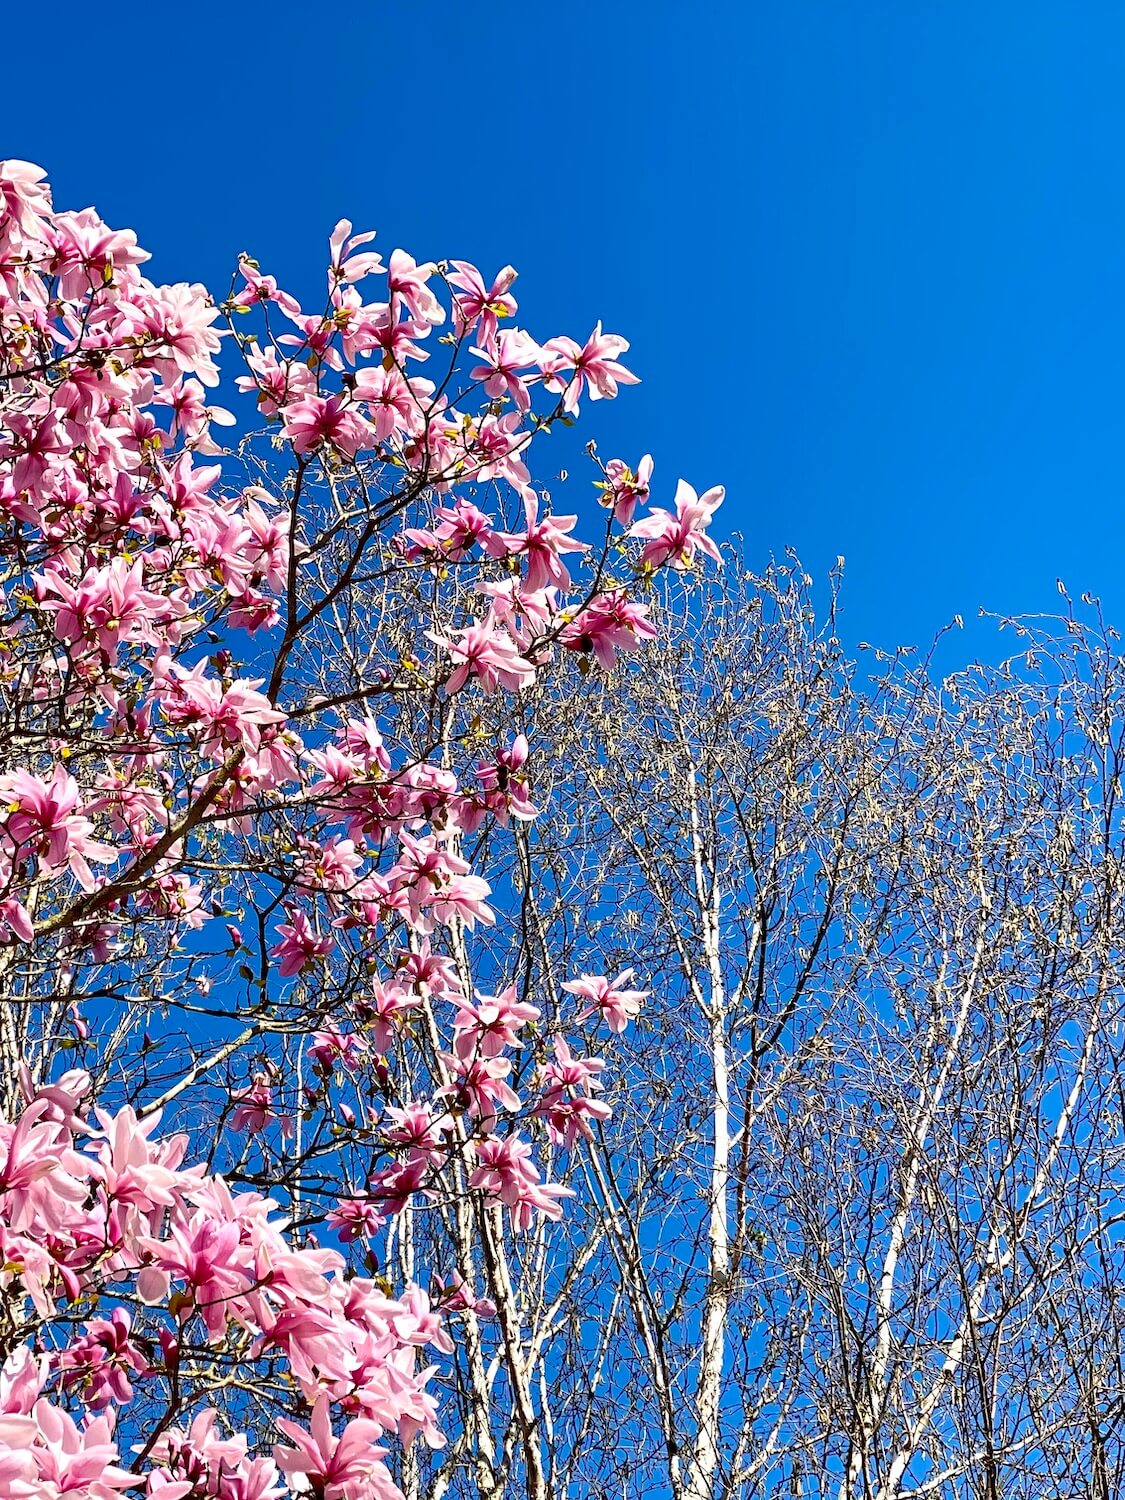 Bright pink magnolia blossoms open up next to a still Dormant birch tree in Washington Park Arboretum.  This is a great place to explore the outdoors in Springtime in Seattle.  